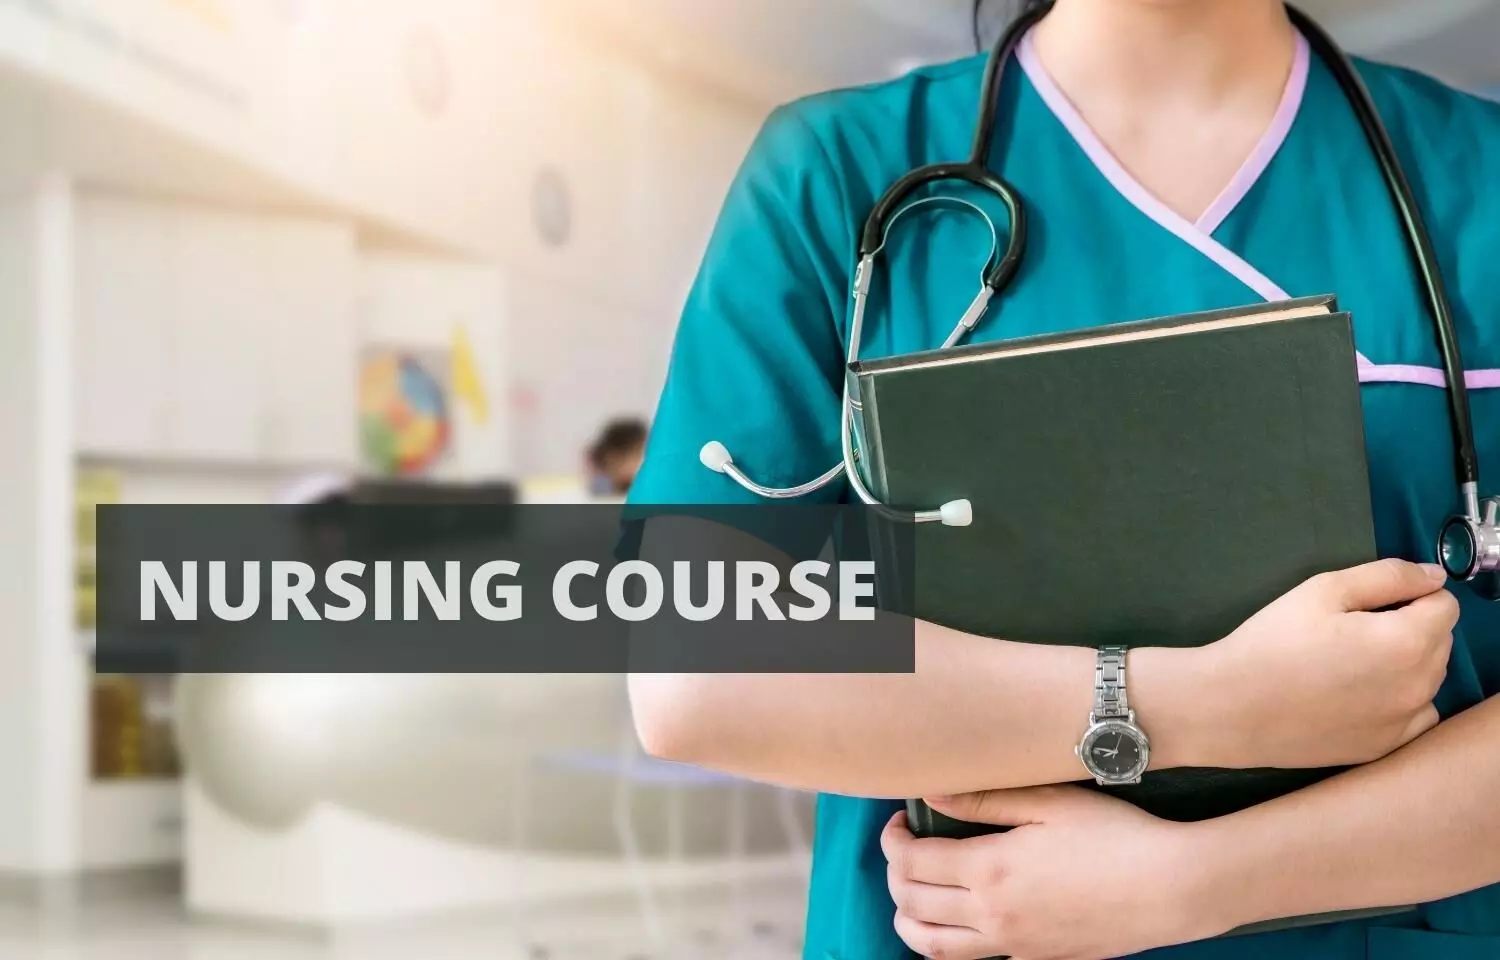 NIHFW to conduct Training Course on Building Nursing and Midwifery Leadership, Details